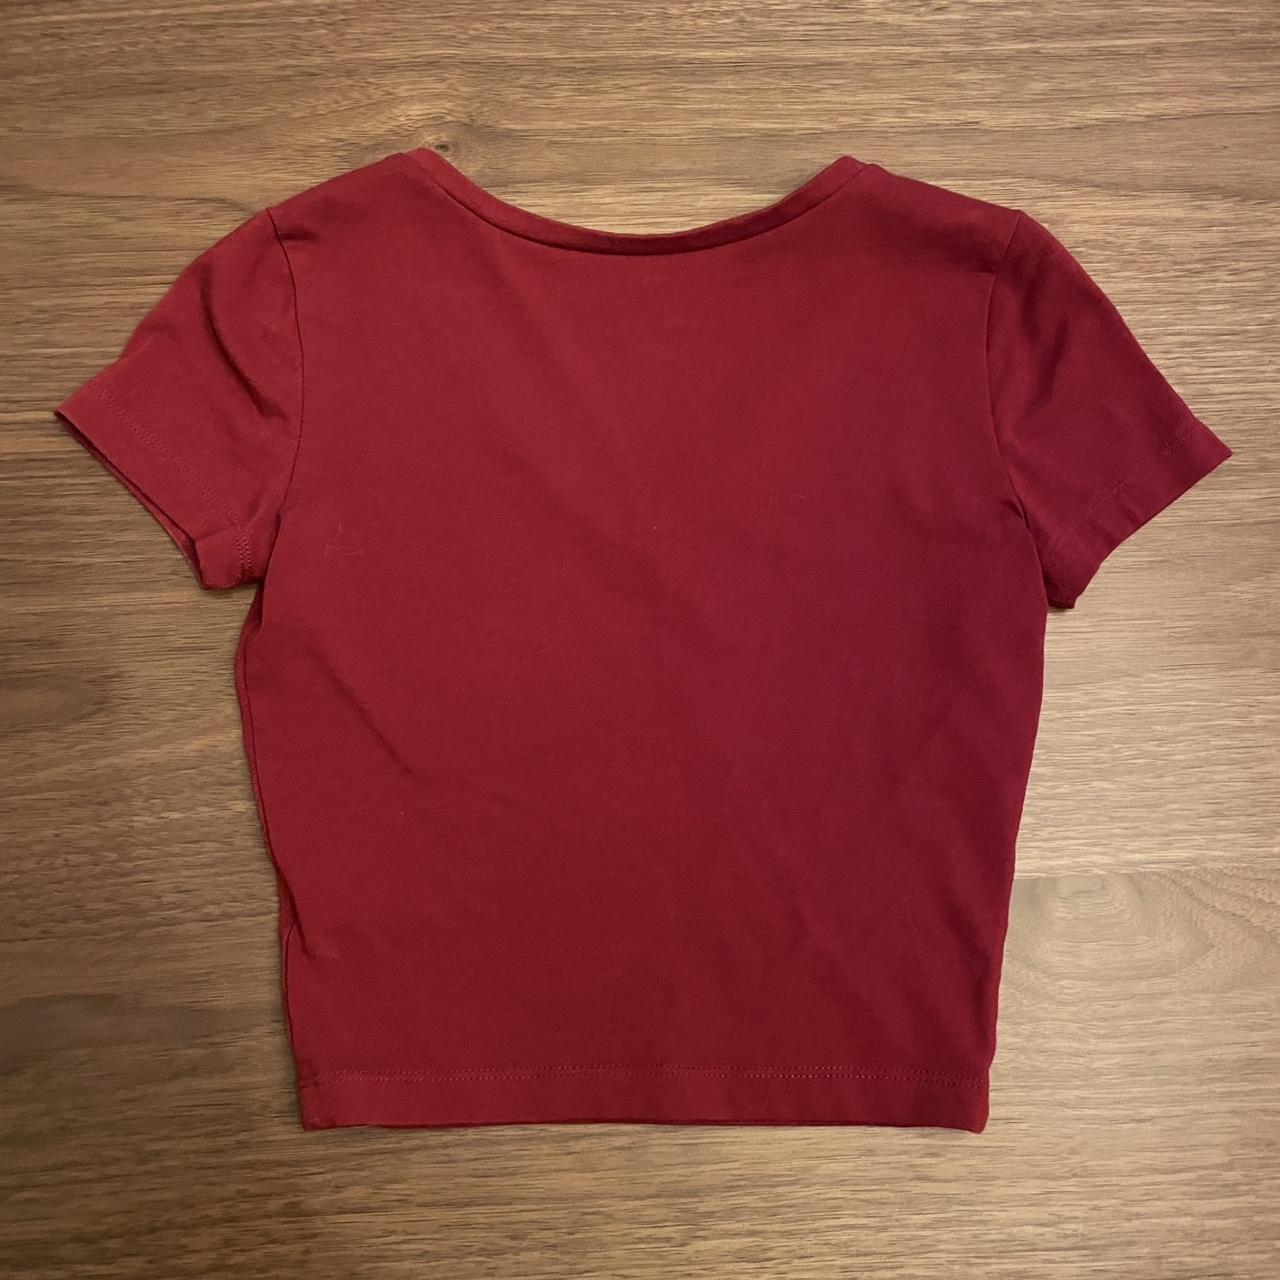 Target Wild Fable Women's Cropped V-Neck Tee. Size - Depop